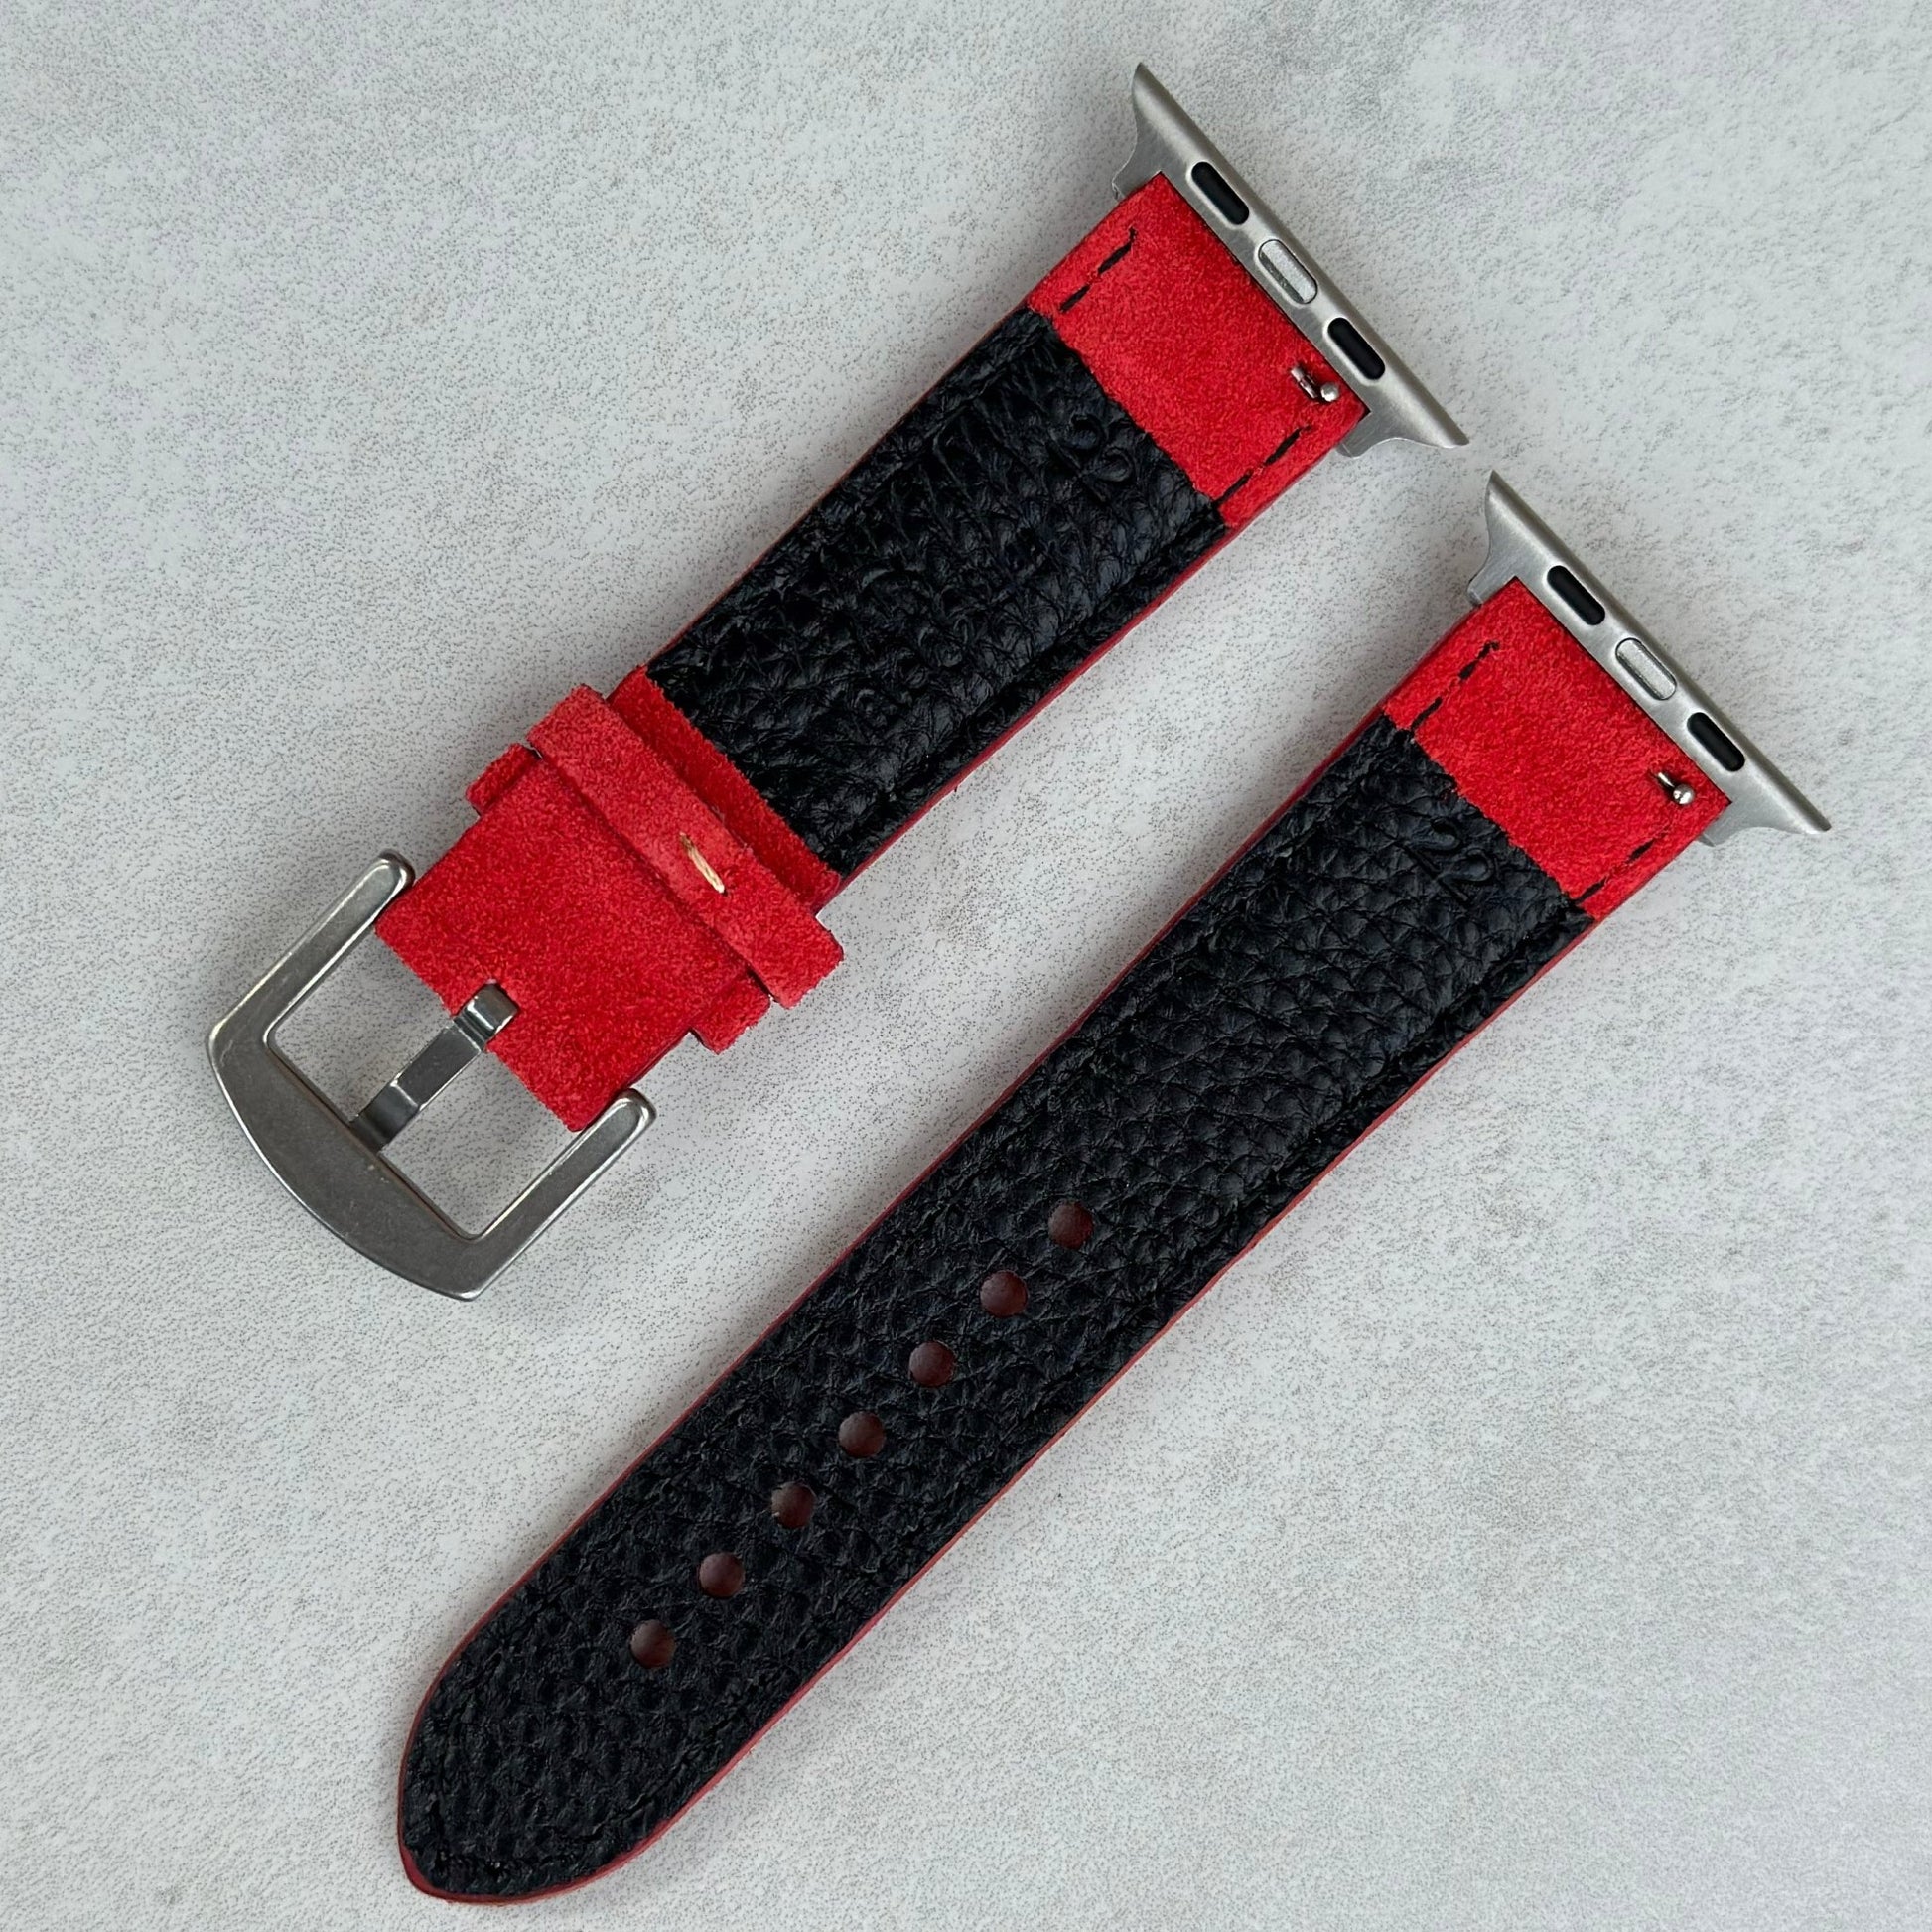 Underside of the Paris ruby red suede watch strap. Watch And Strap logo.